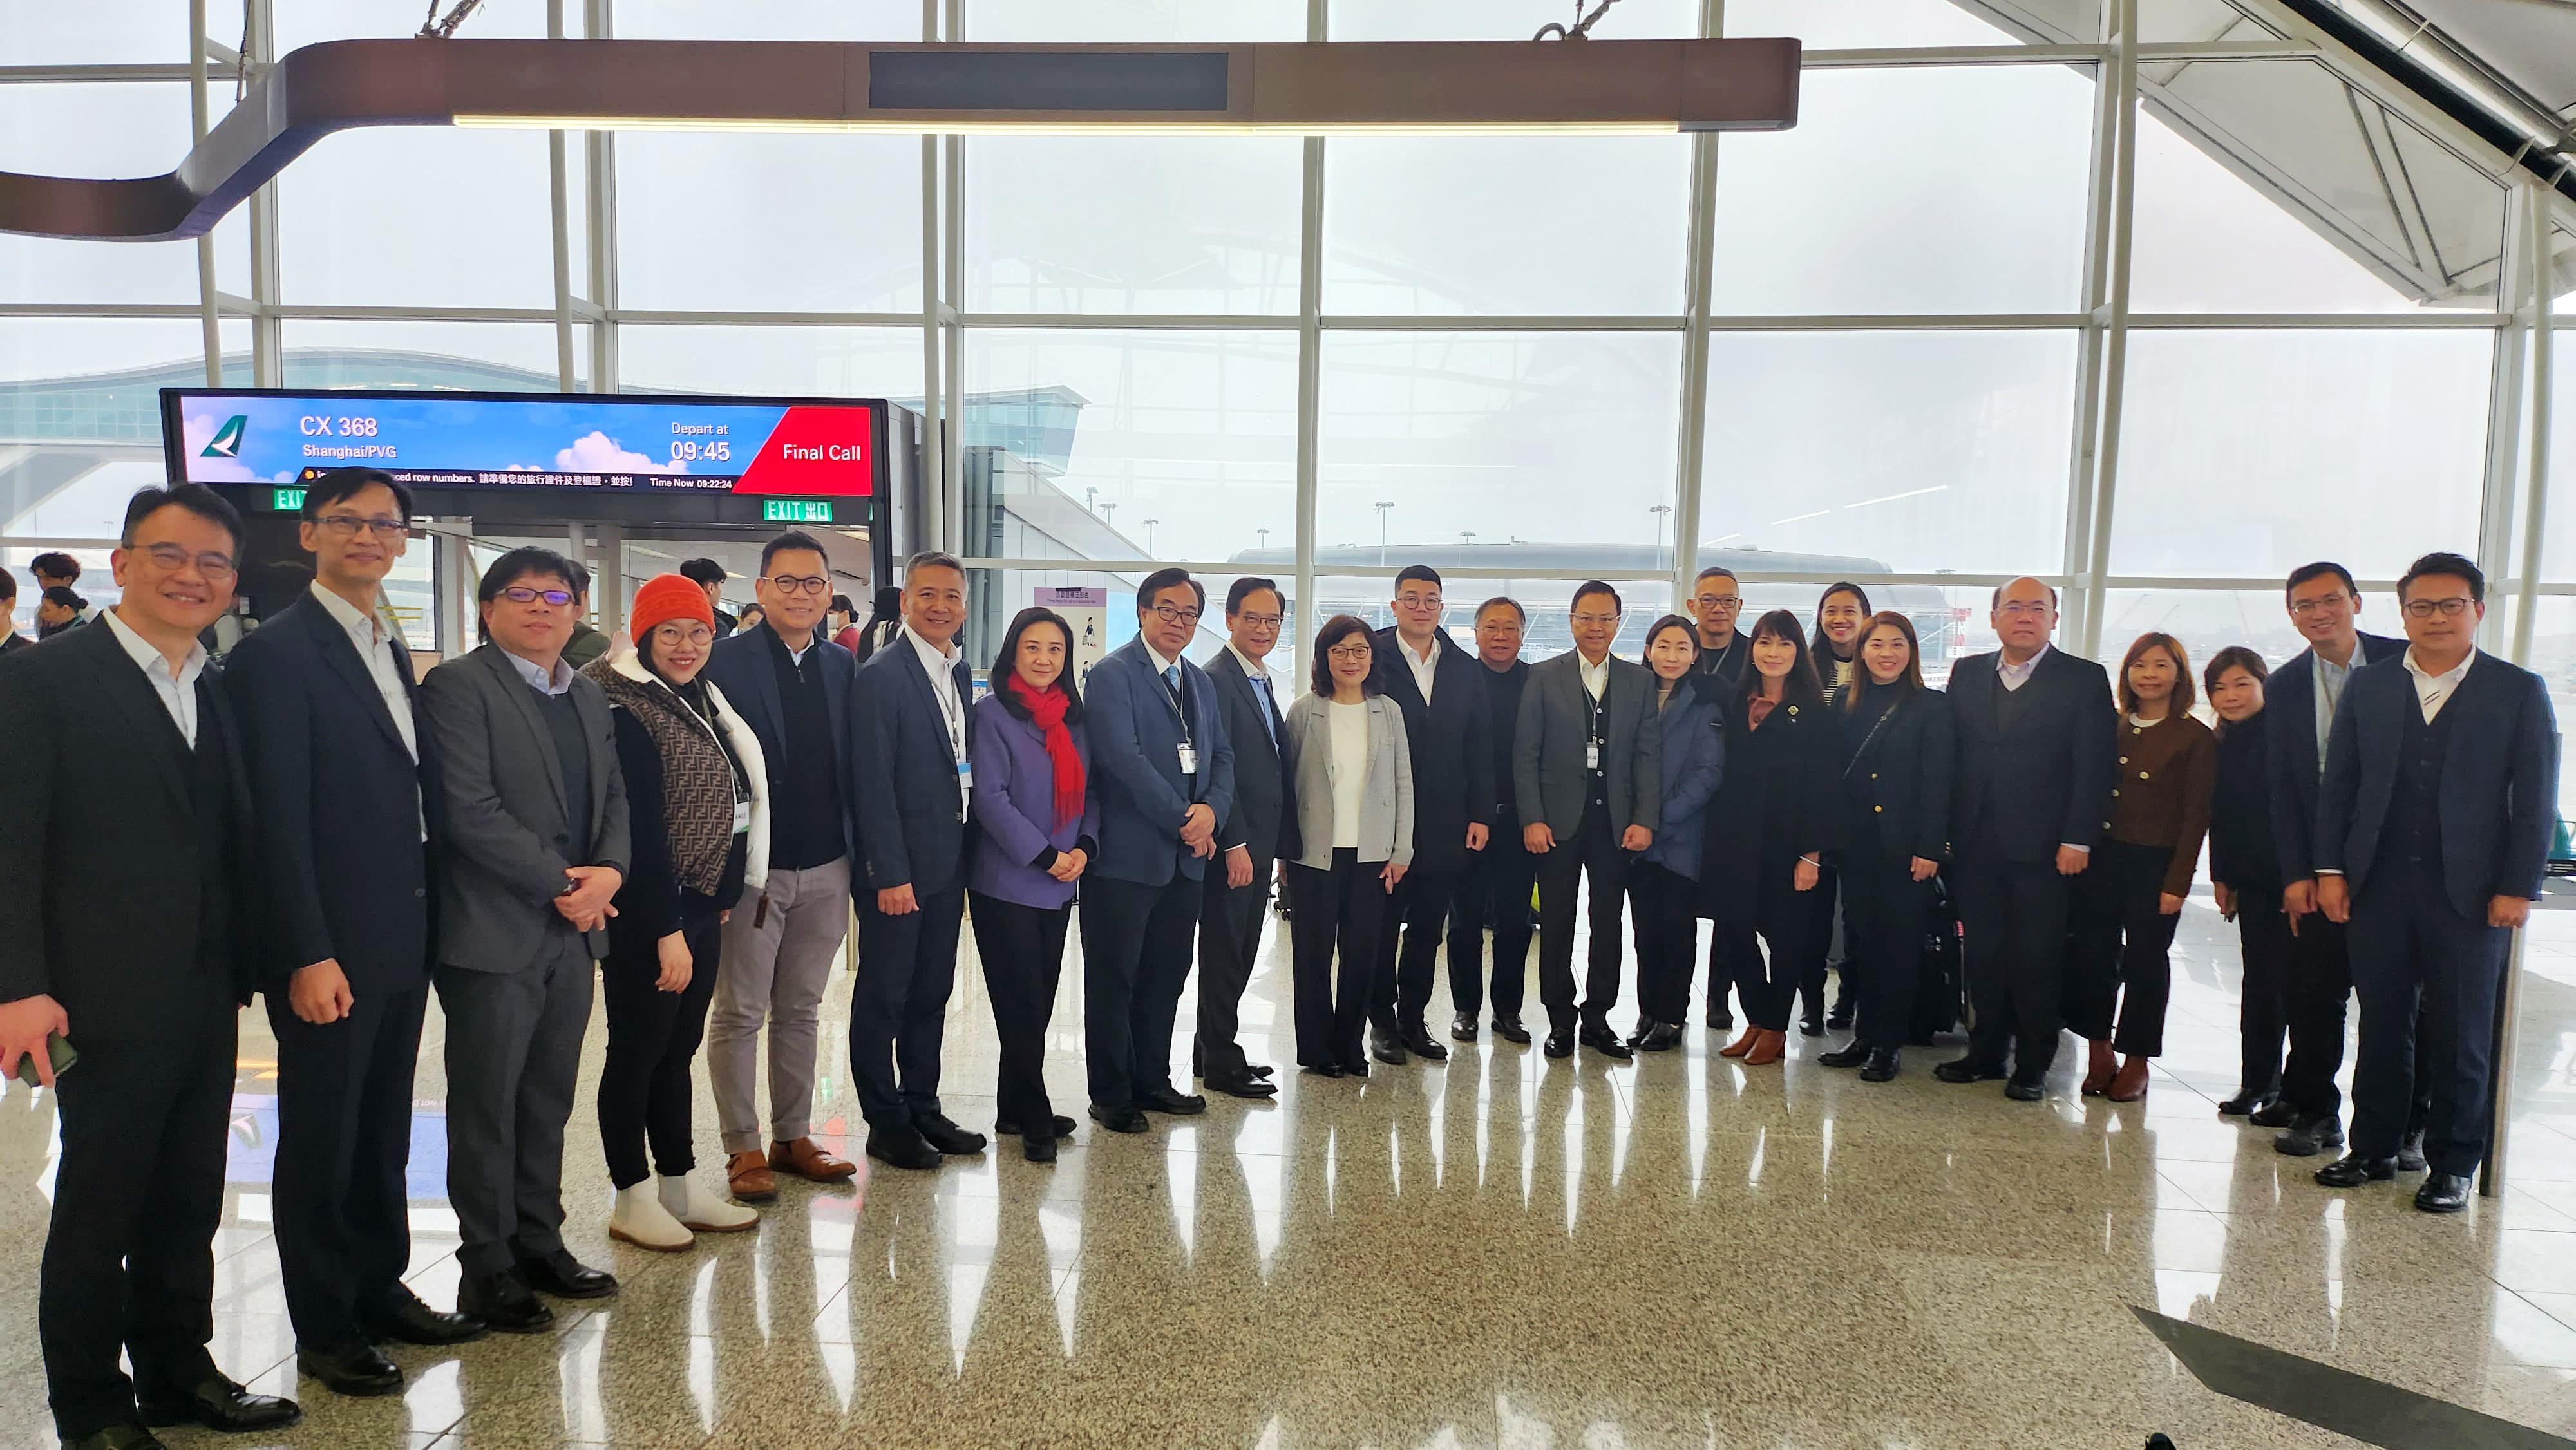 The delegation of the Legislative Council (LegCo) Panel on Development begins the three-day duty visit to Shanghai today (December 19). Photo shows LegCo Members, the Secretary for Development, Ms Bernadette Linn (tenth left) and government officials, posing for a group photo before they depart at the Hong Kong International Airport.